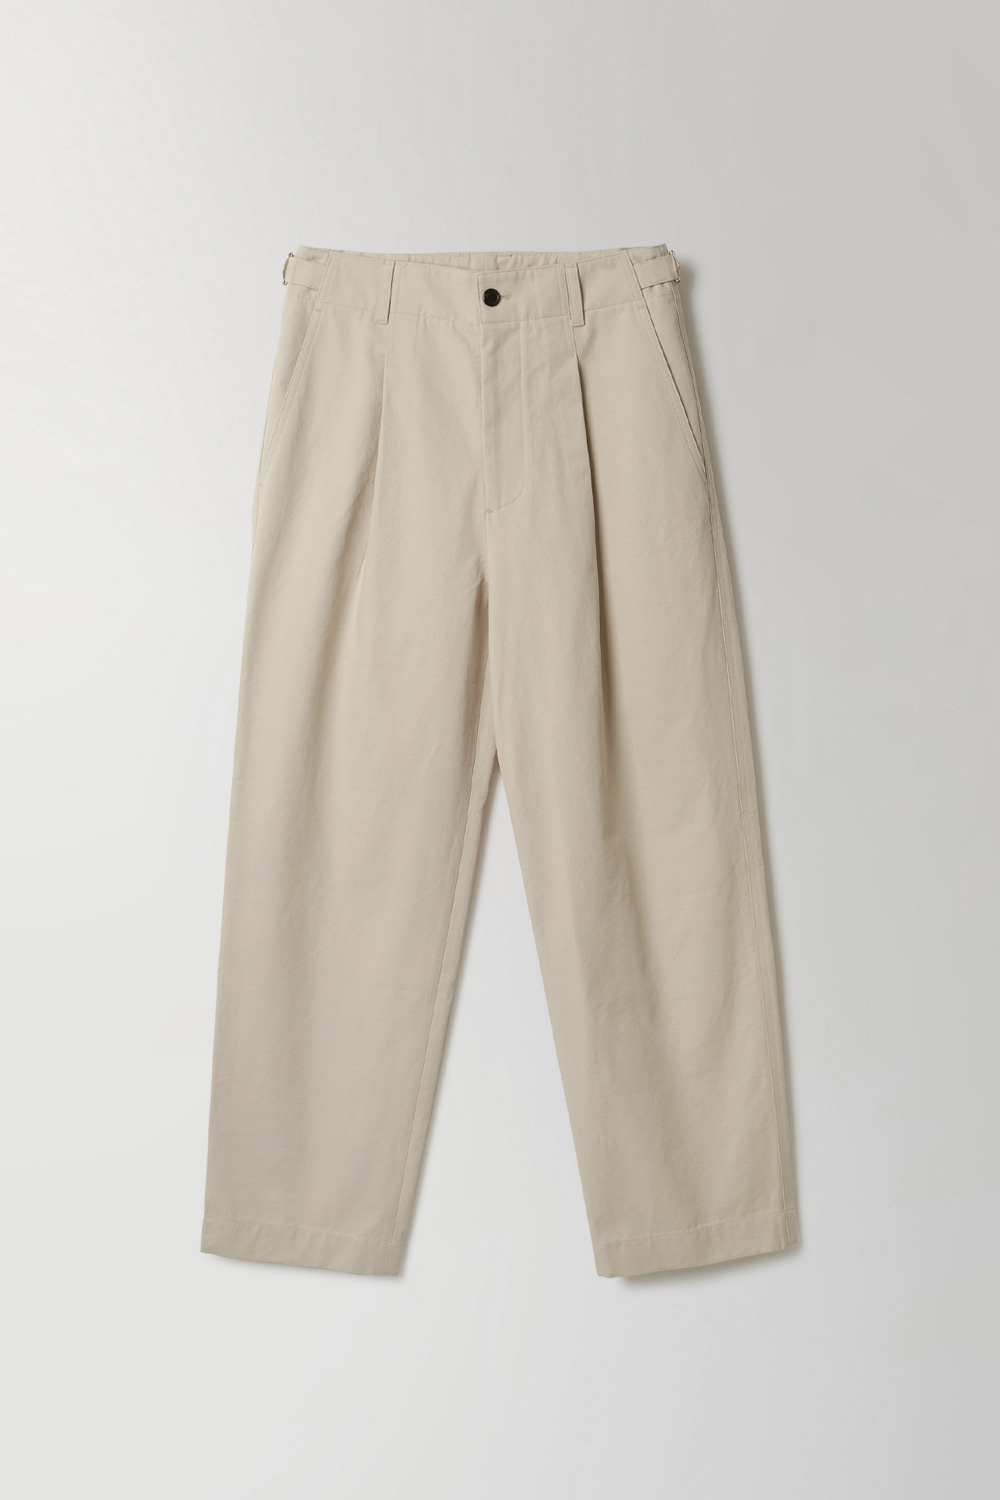 [2ND] STRUCTURED CHINO PANTS - SAND BEIGE